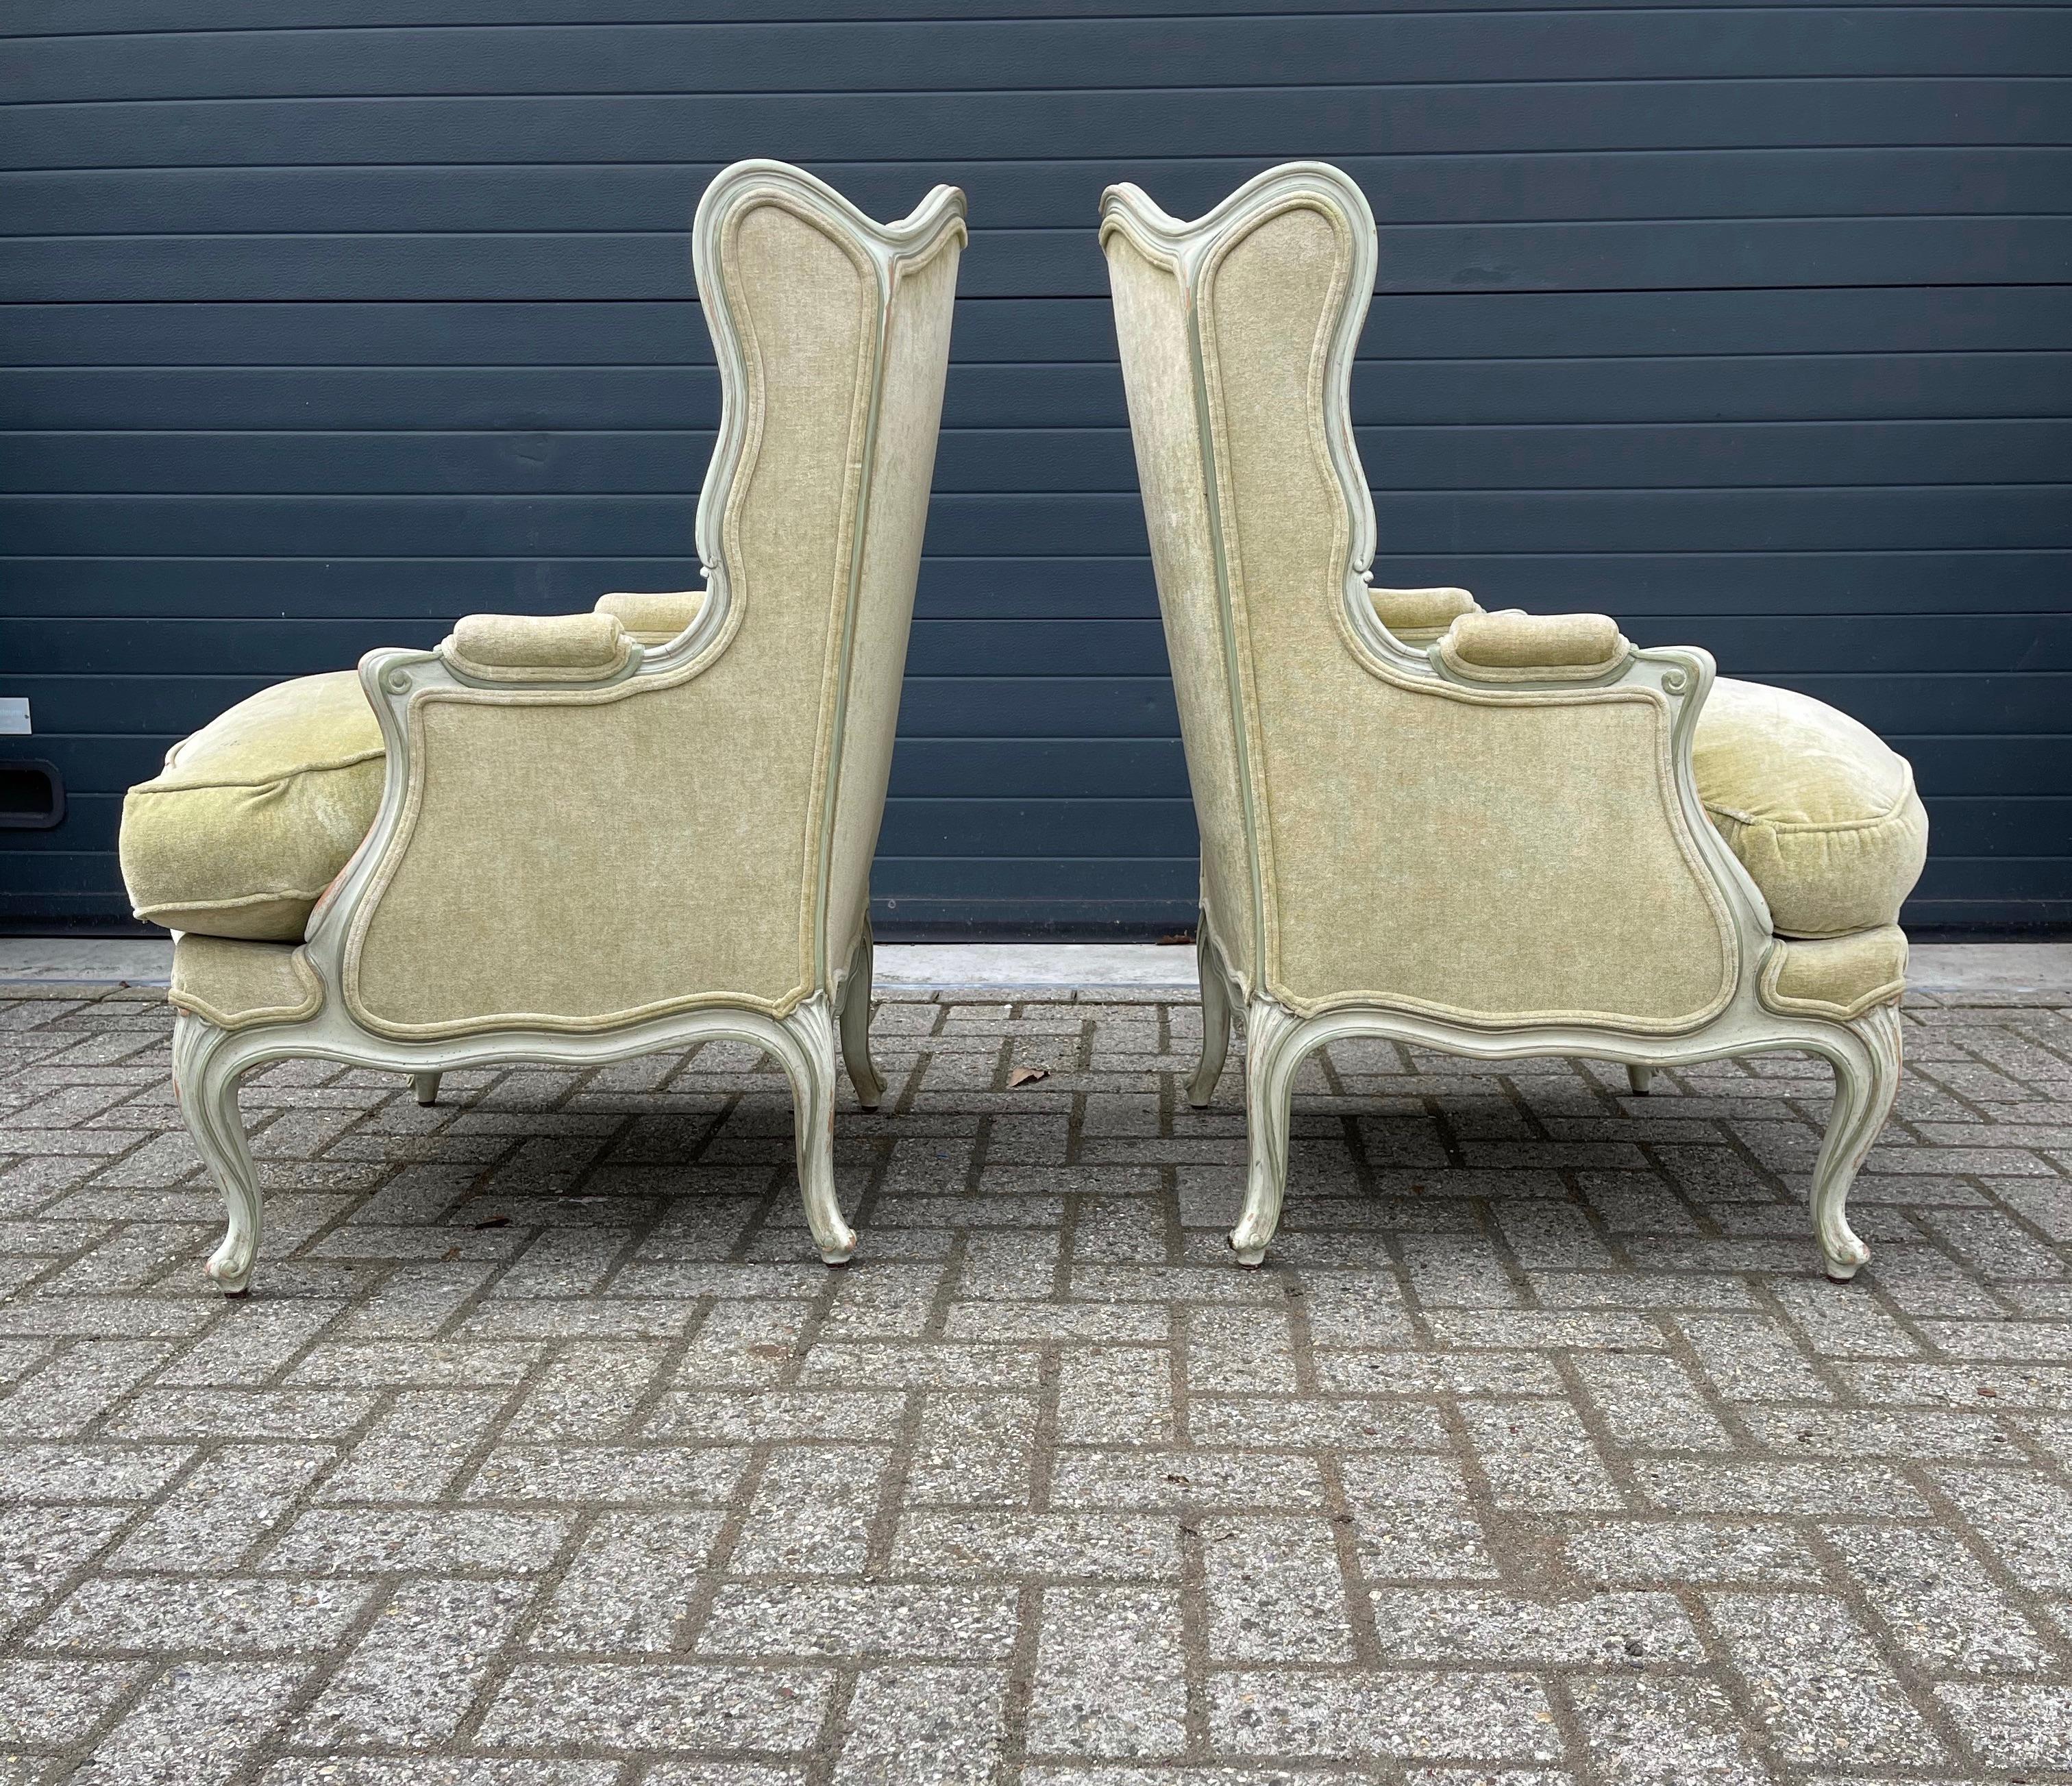 Magnificent design with classical green velvet upholstery wing back chairs.

This vintage and pastel green painted pair of wingback chairs is beautiful in design, they are in superb condition and very comfortable to sit it. This stylish and